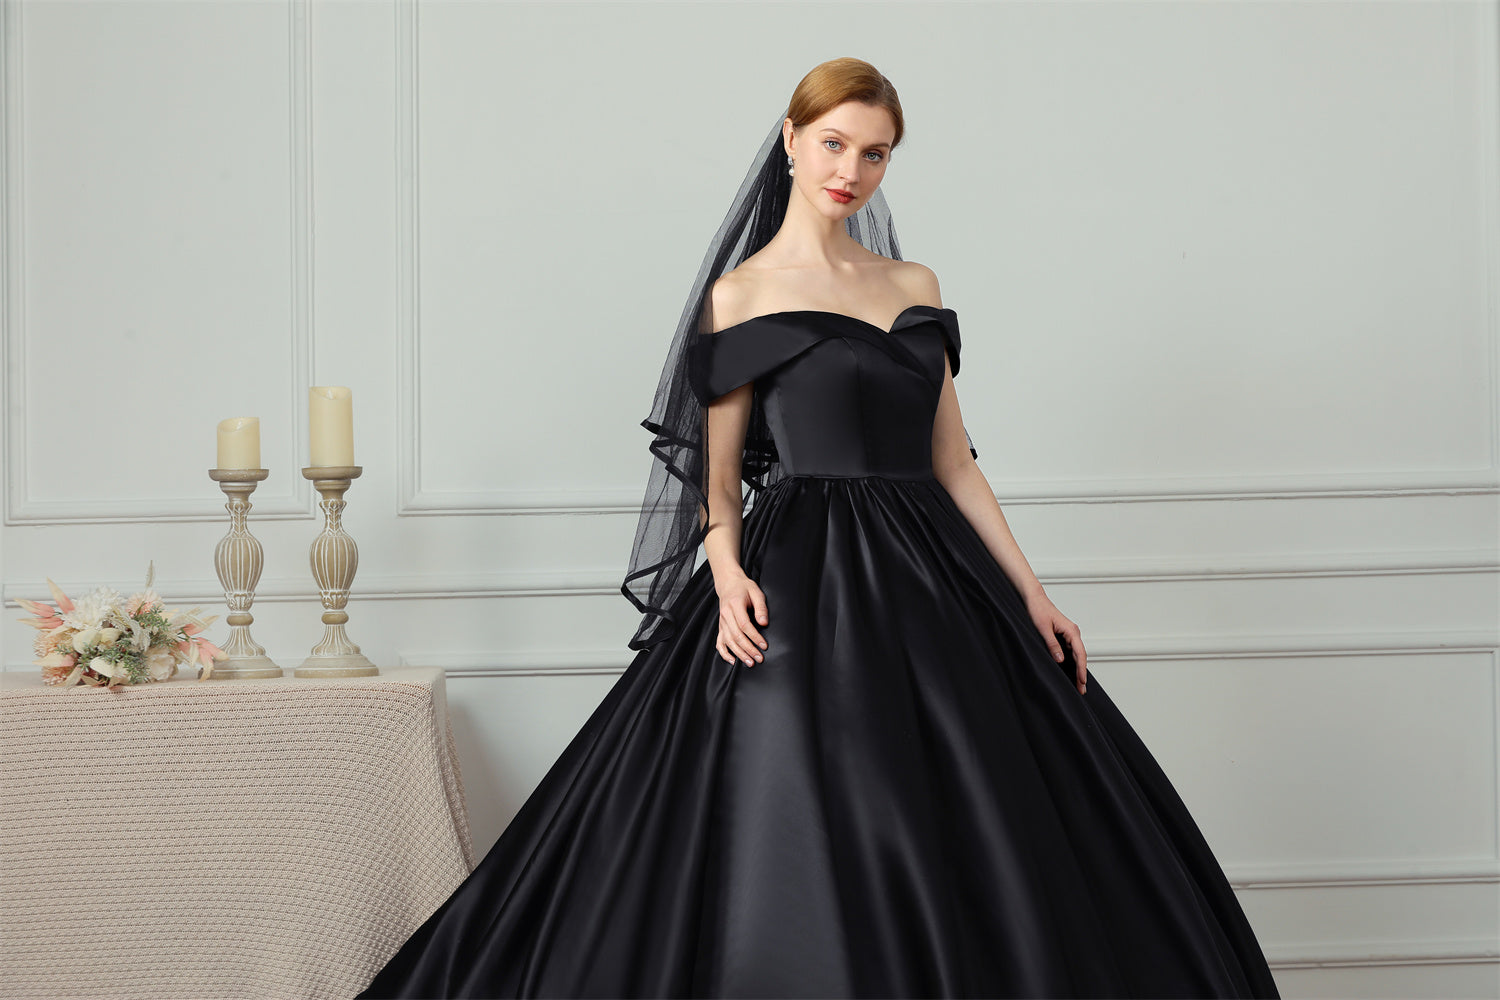 The Black Ball Gown - Goth Mall